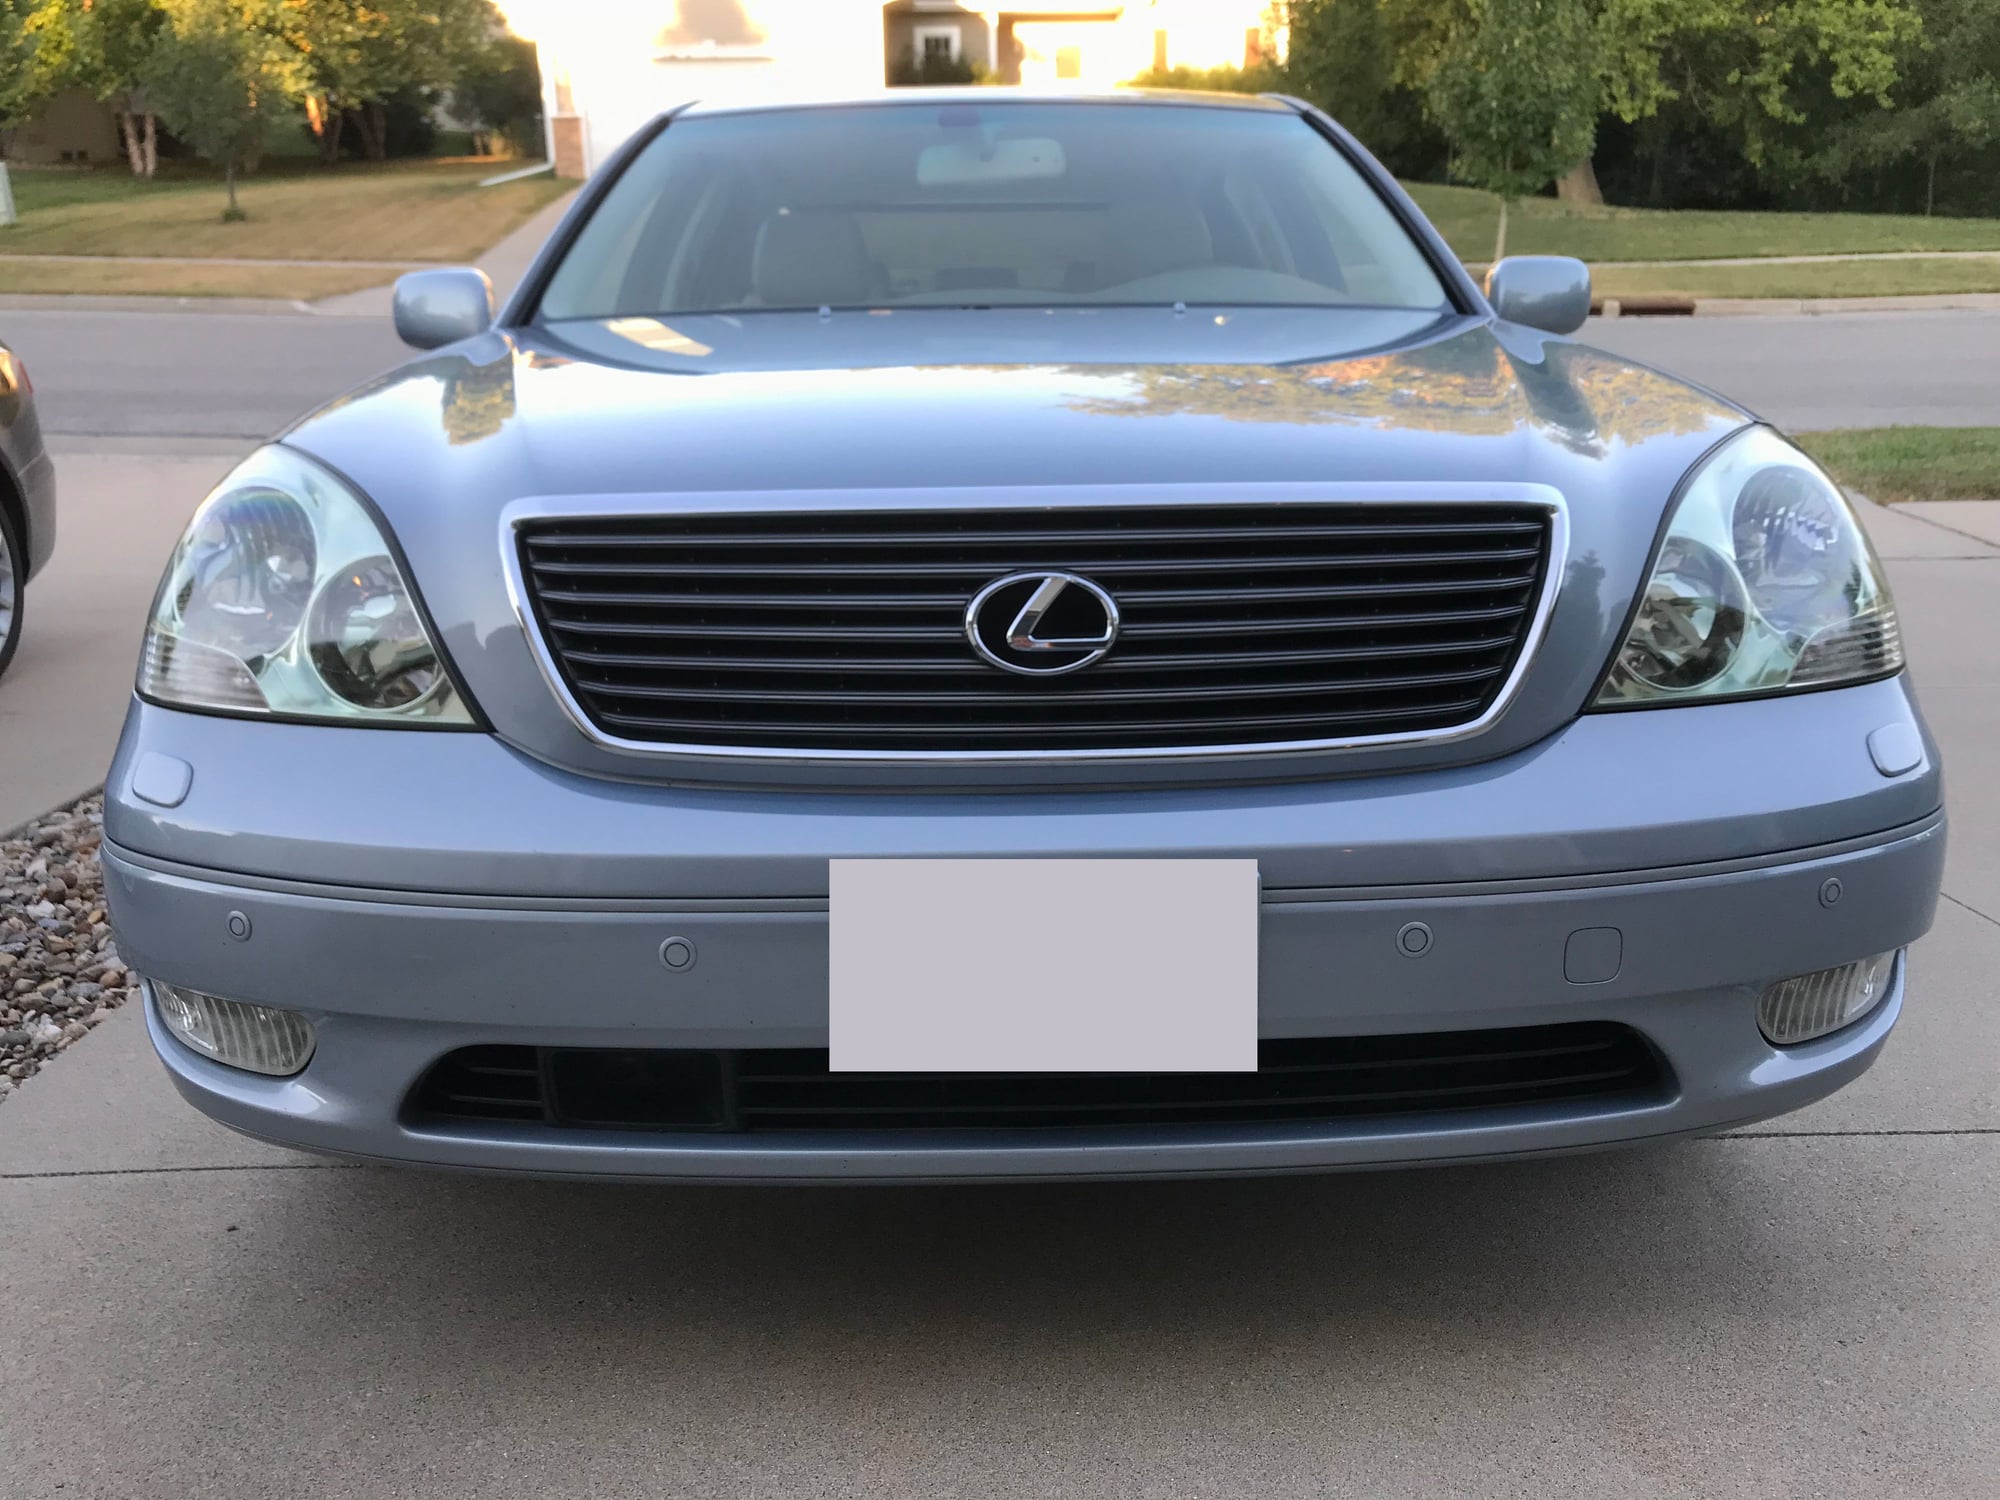 2002 Lexus LS430 - Two Owner Lexus 2002 LS 430 Ultra, Excellent 130,332 Miles - Used - VIN jthbn30f620092264 - 8 cyl - 2WD - Automatic - Sedan - Blue - Ames, IA 50010, United States